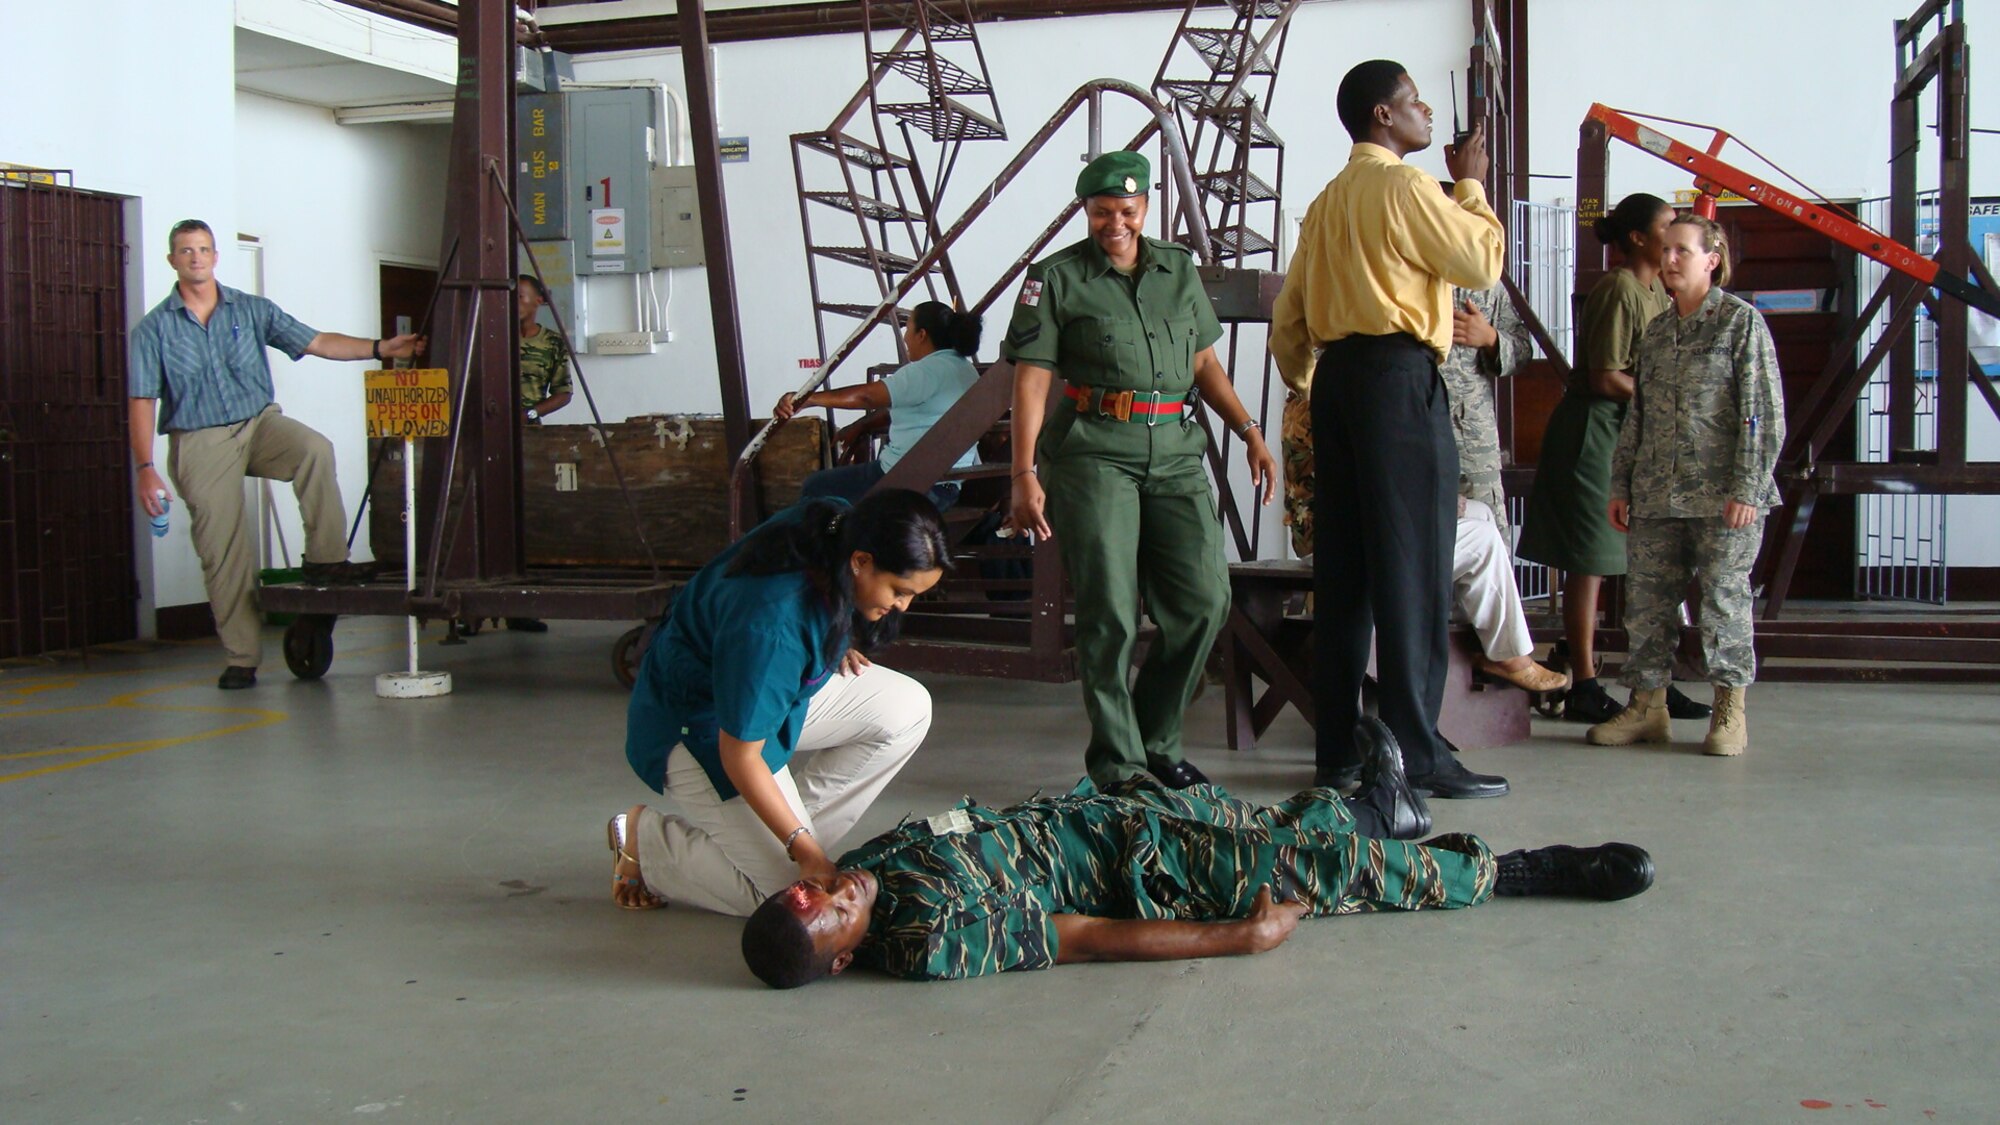 U. S. Air Force instructors from the Air Force DIMO team based at Brooks City-Base, Texas, conduct a mass casualty (MASCAL) exercise with first responders in Georgetown, Guyana. The exercise was part of a week-long first responder course that taught advanced medical techniques for emergencies to Guyana first responders. (Air Force photo)